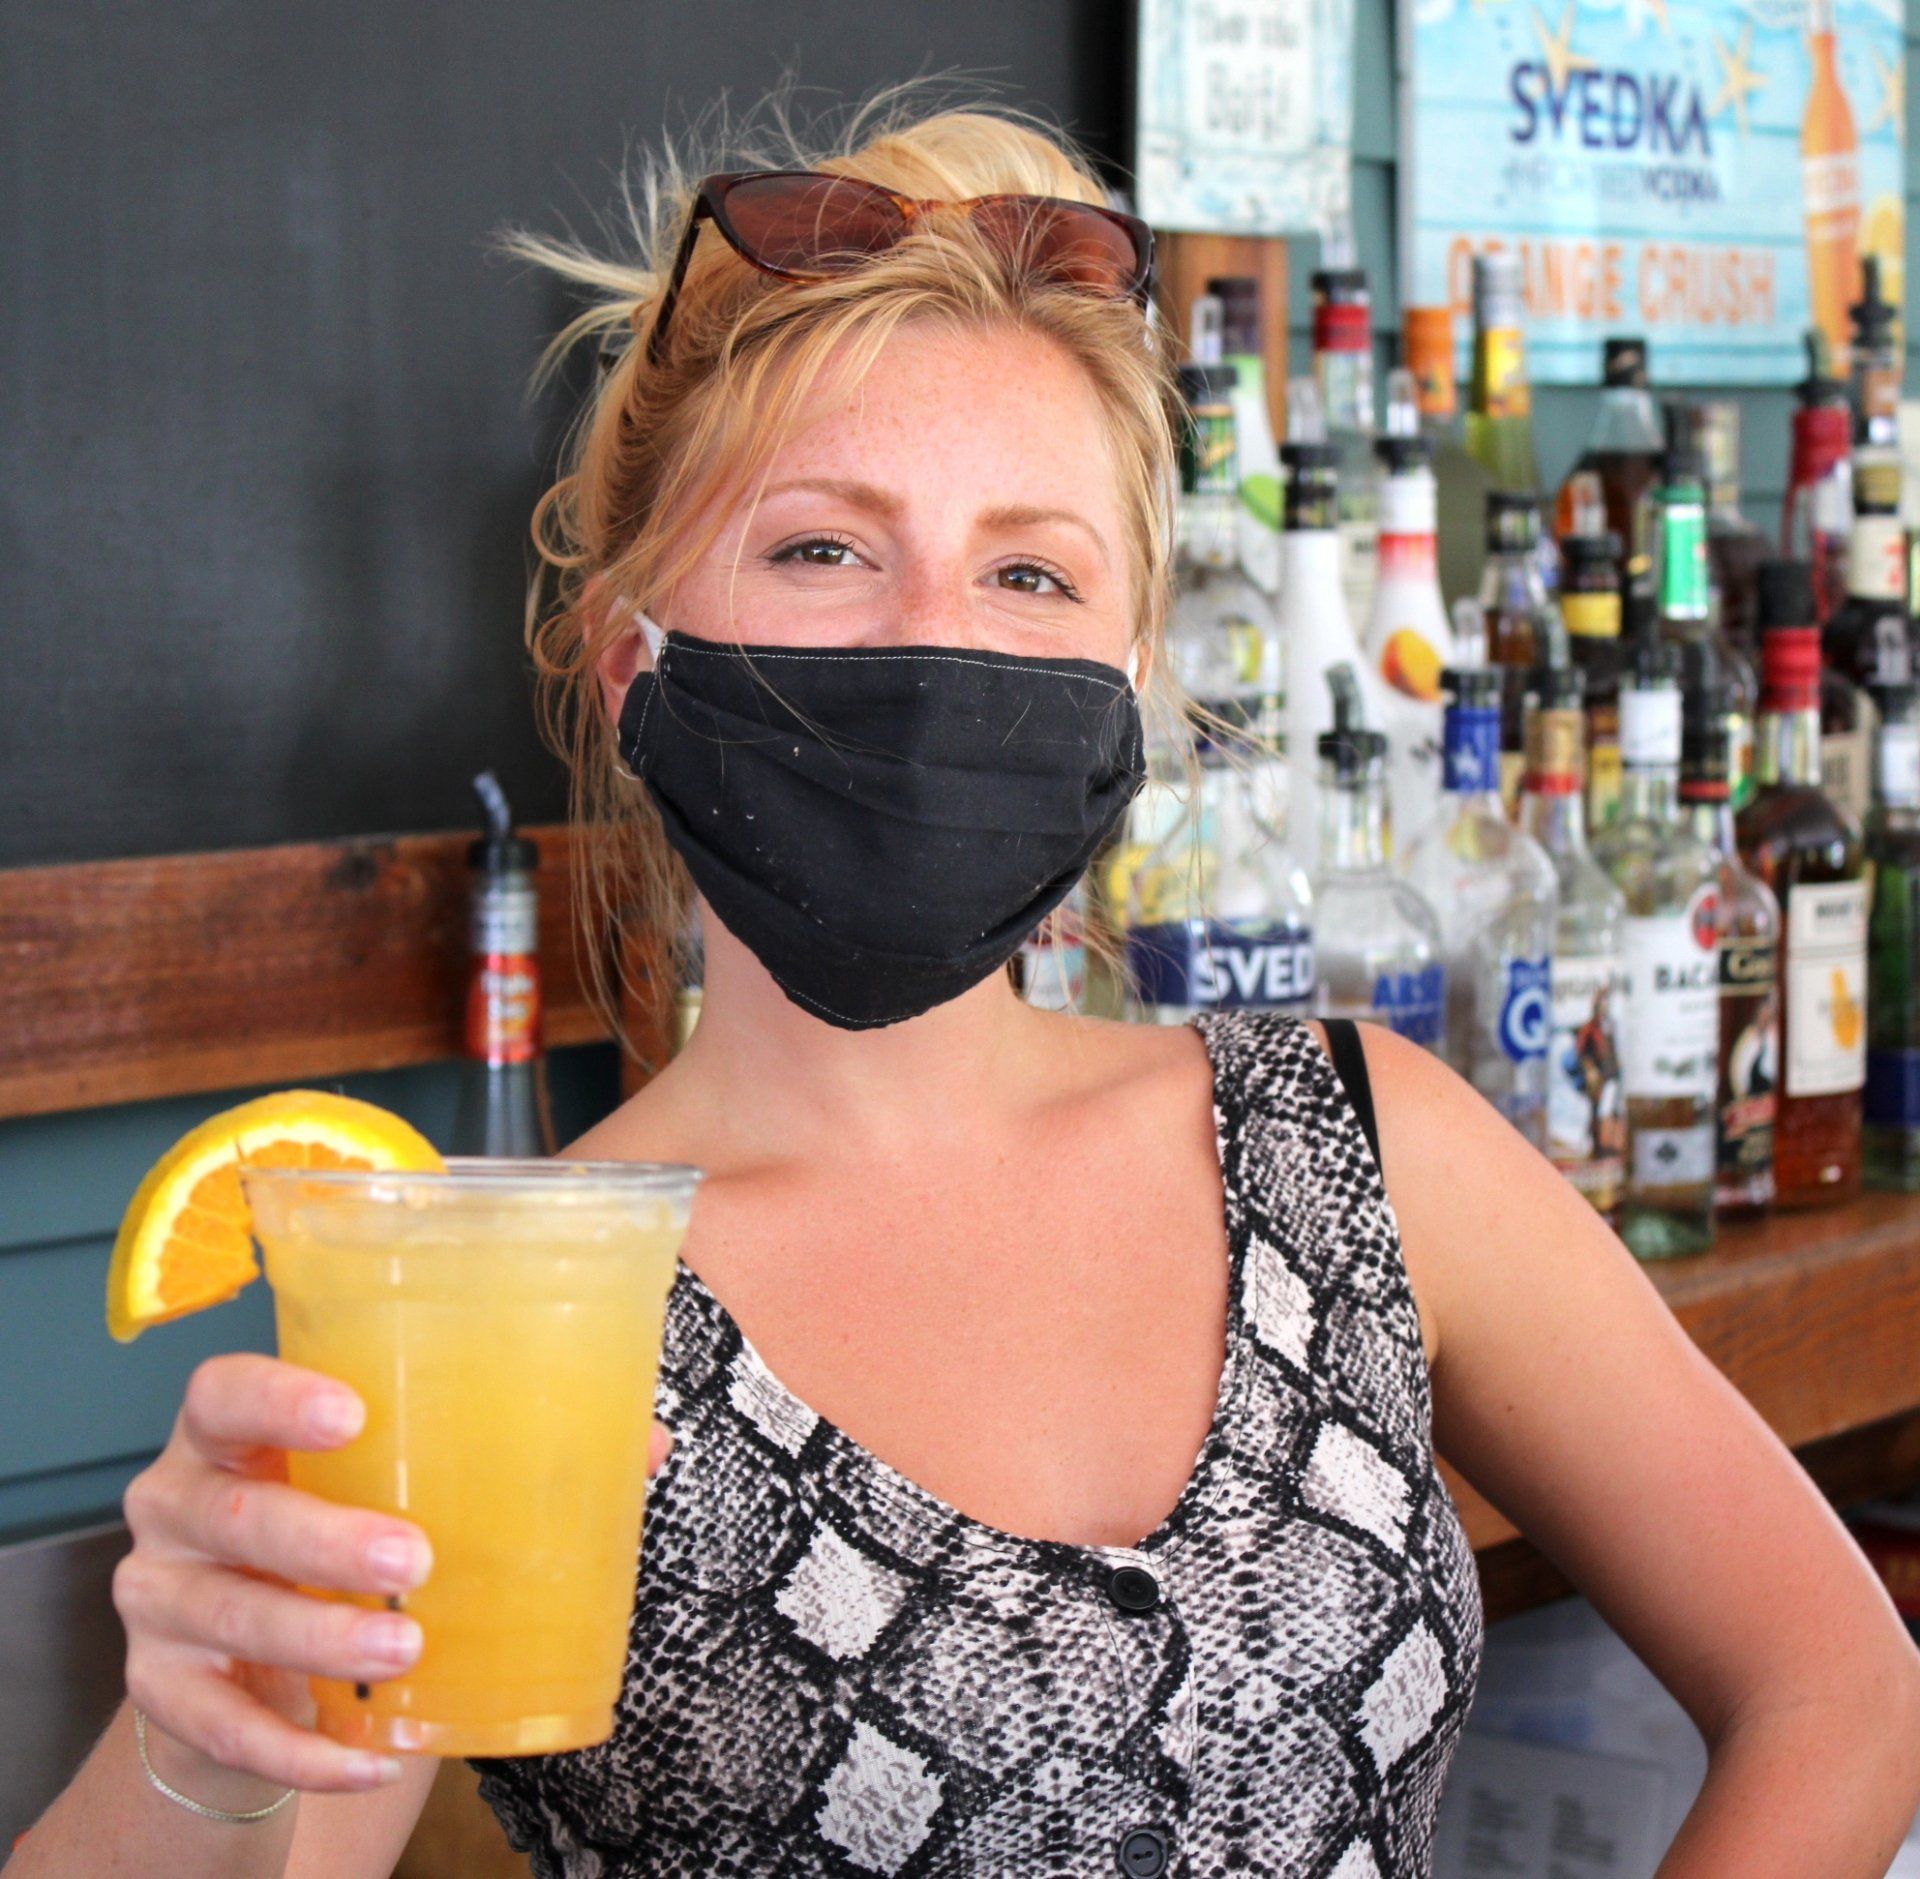 Bartender holds a freshly-made orange cocktail while wearing a mask